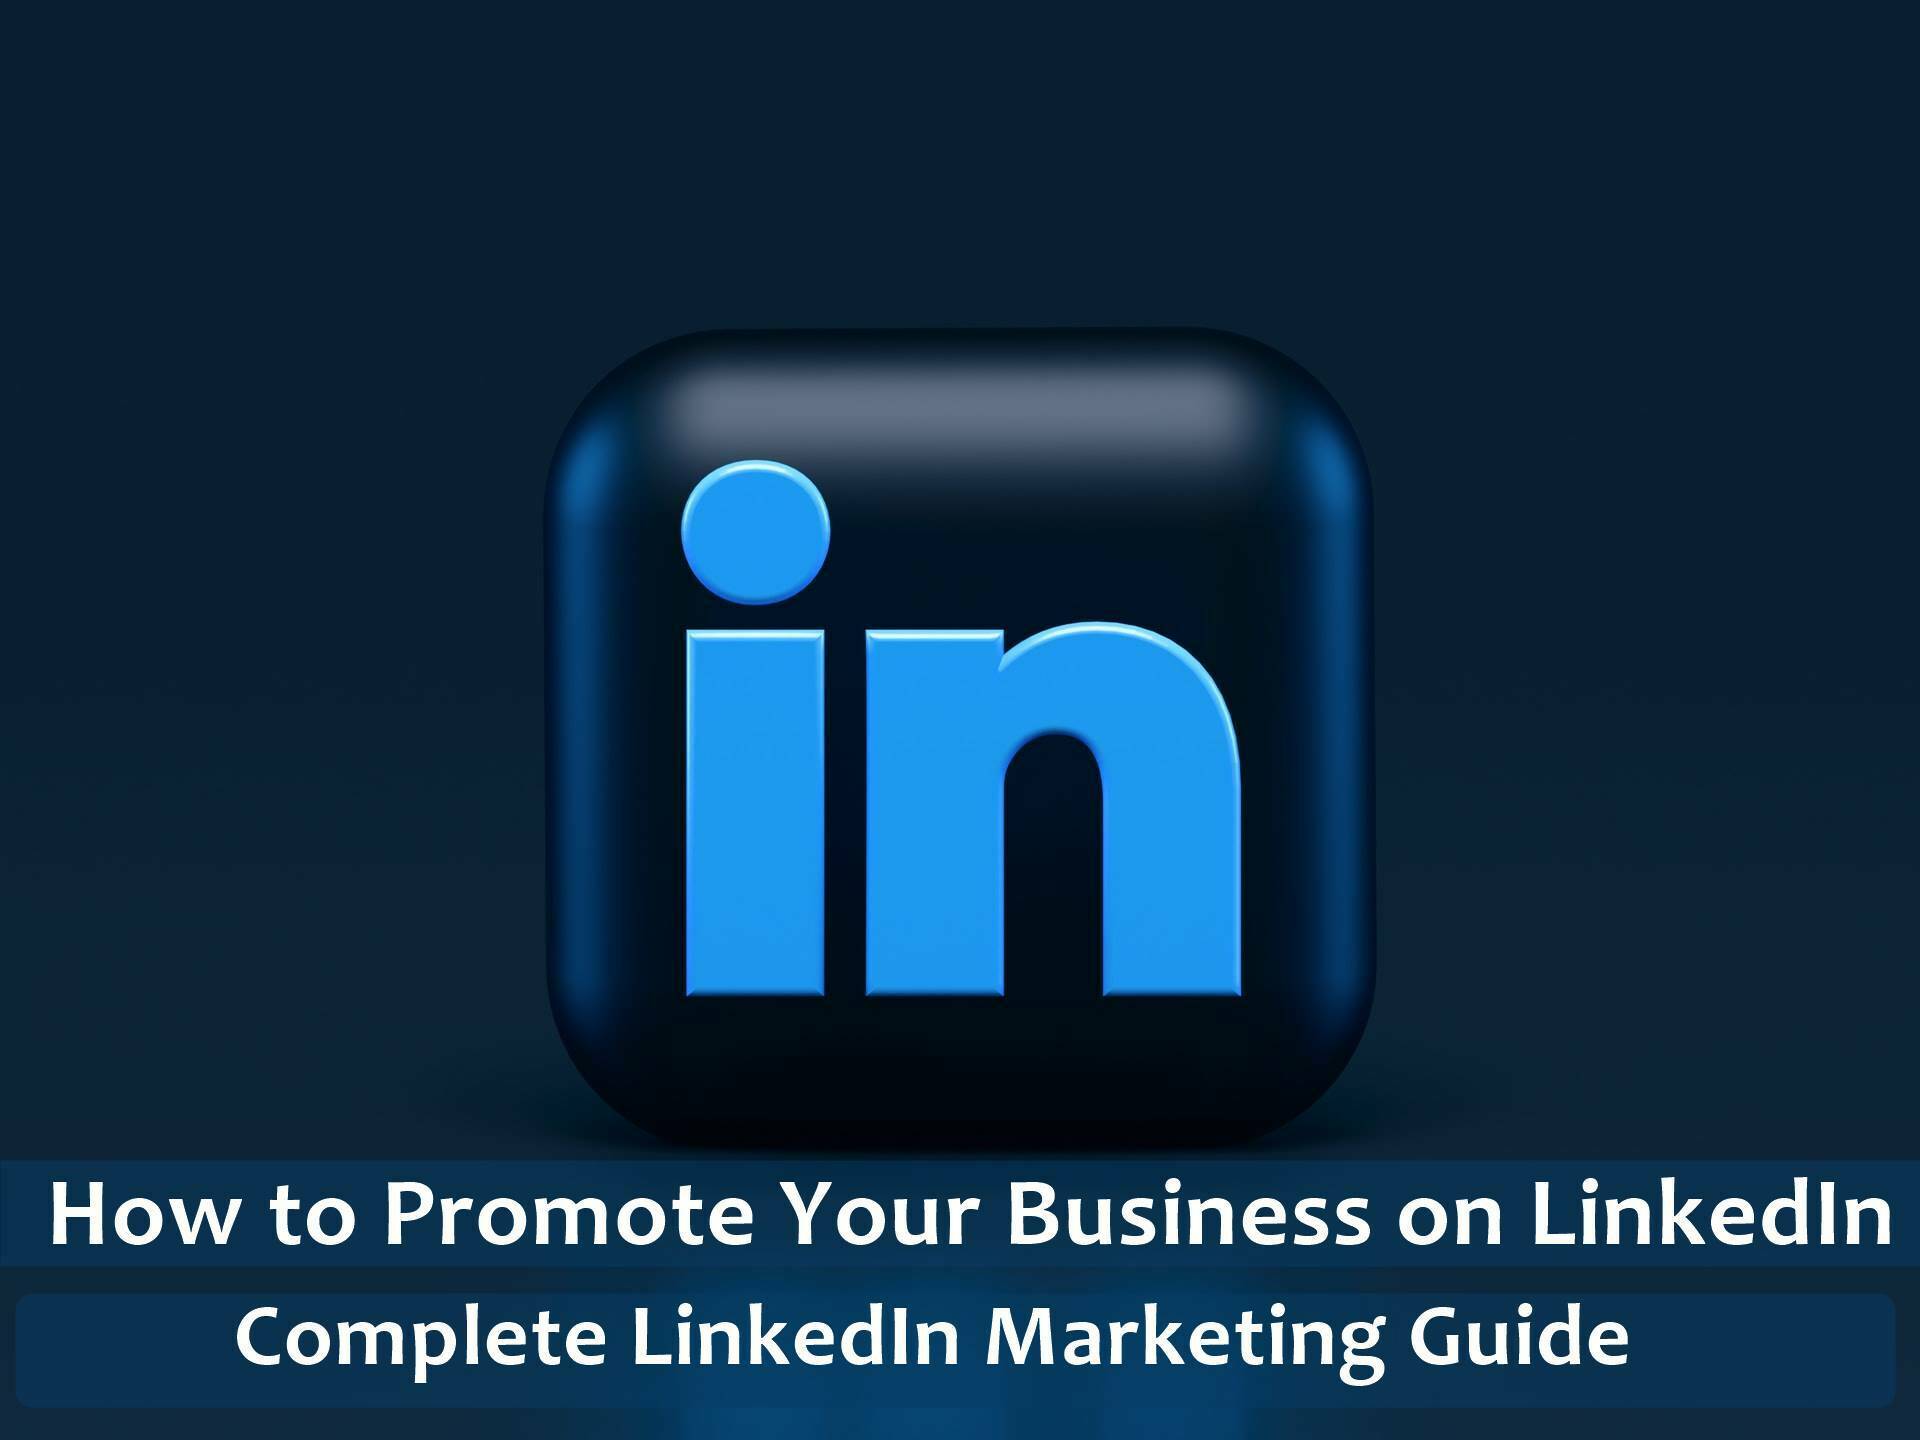 How to Promote Your Business on LinkedIn - Complete LinkedIn Marketing Guide